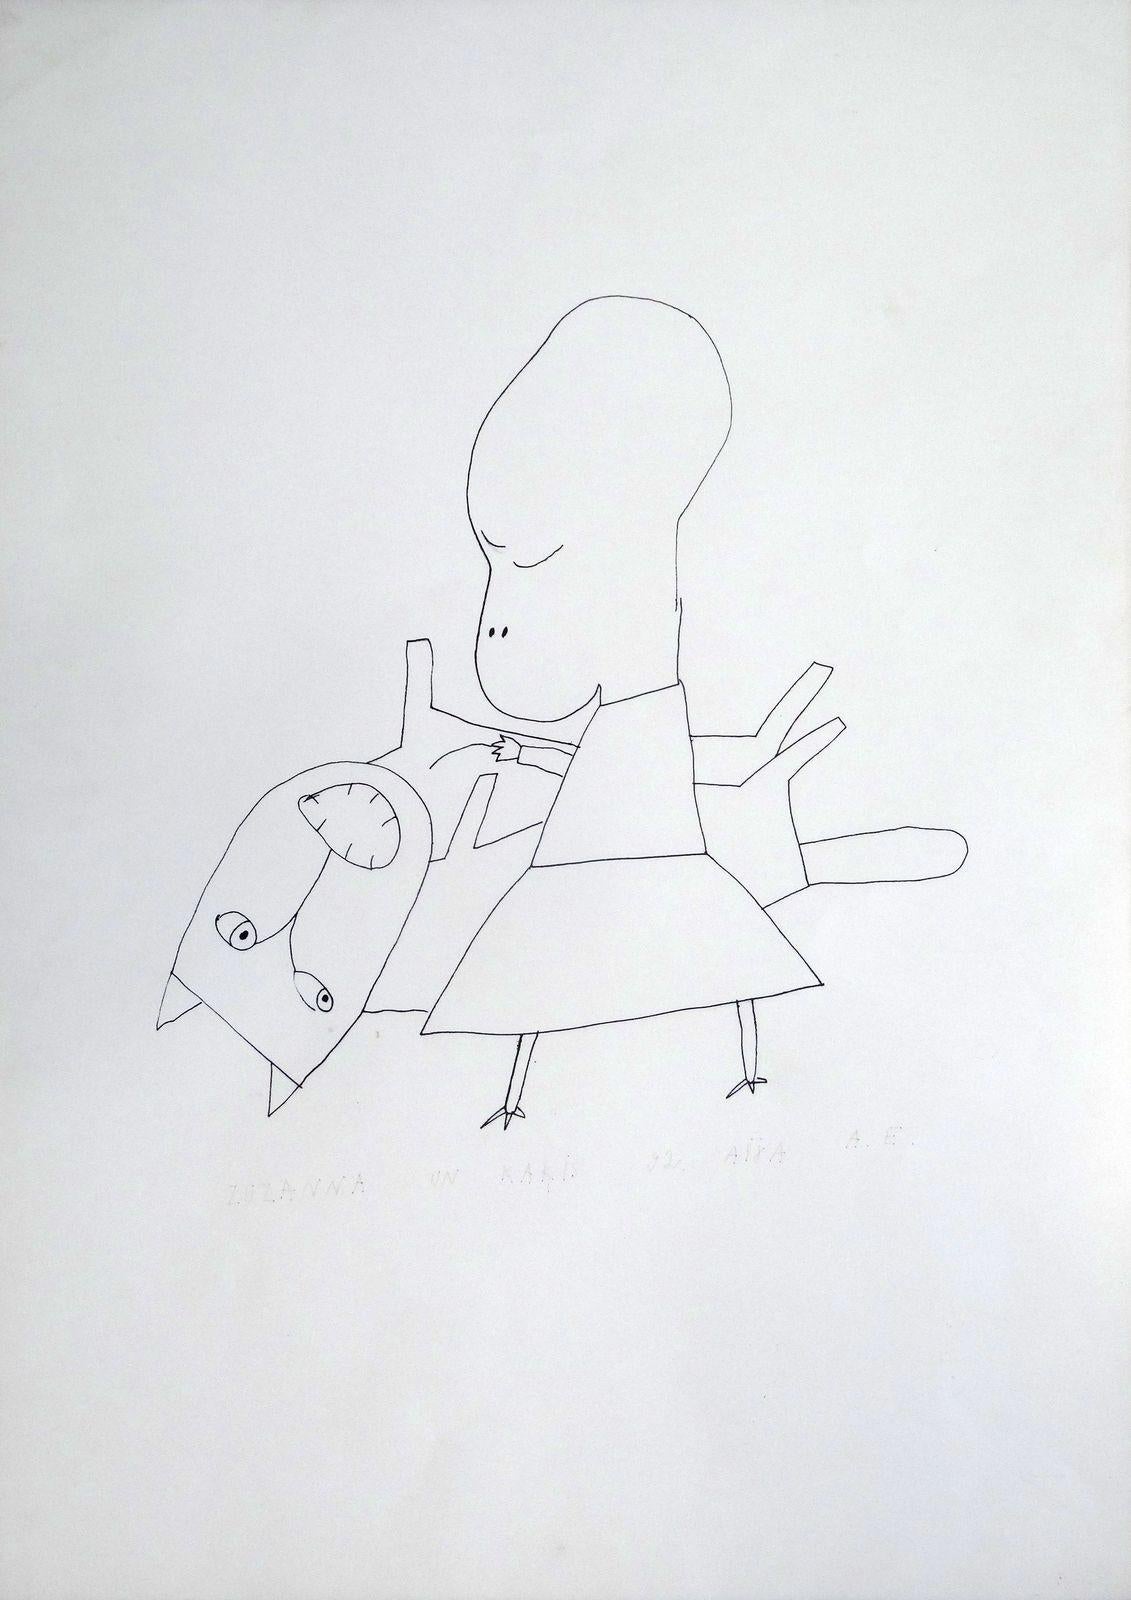 Suzanne and the cat. 1990. Paper, ink, 69x49 cm